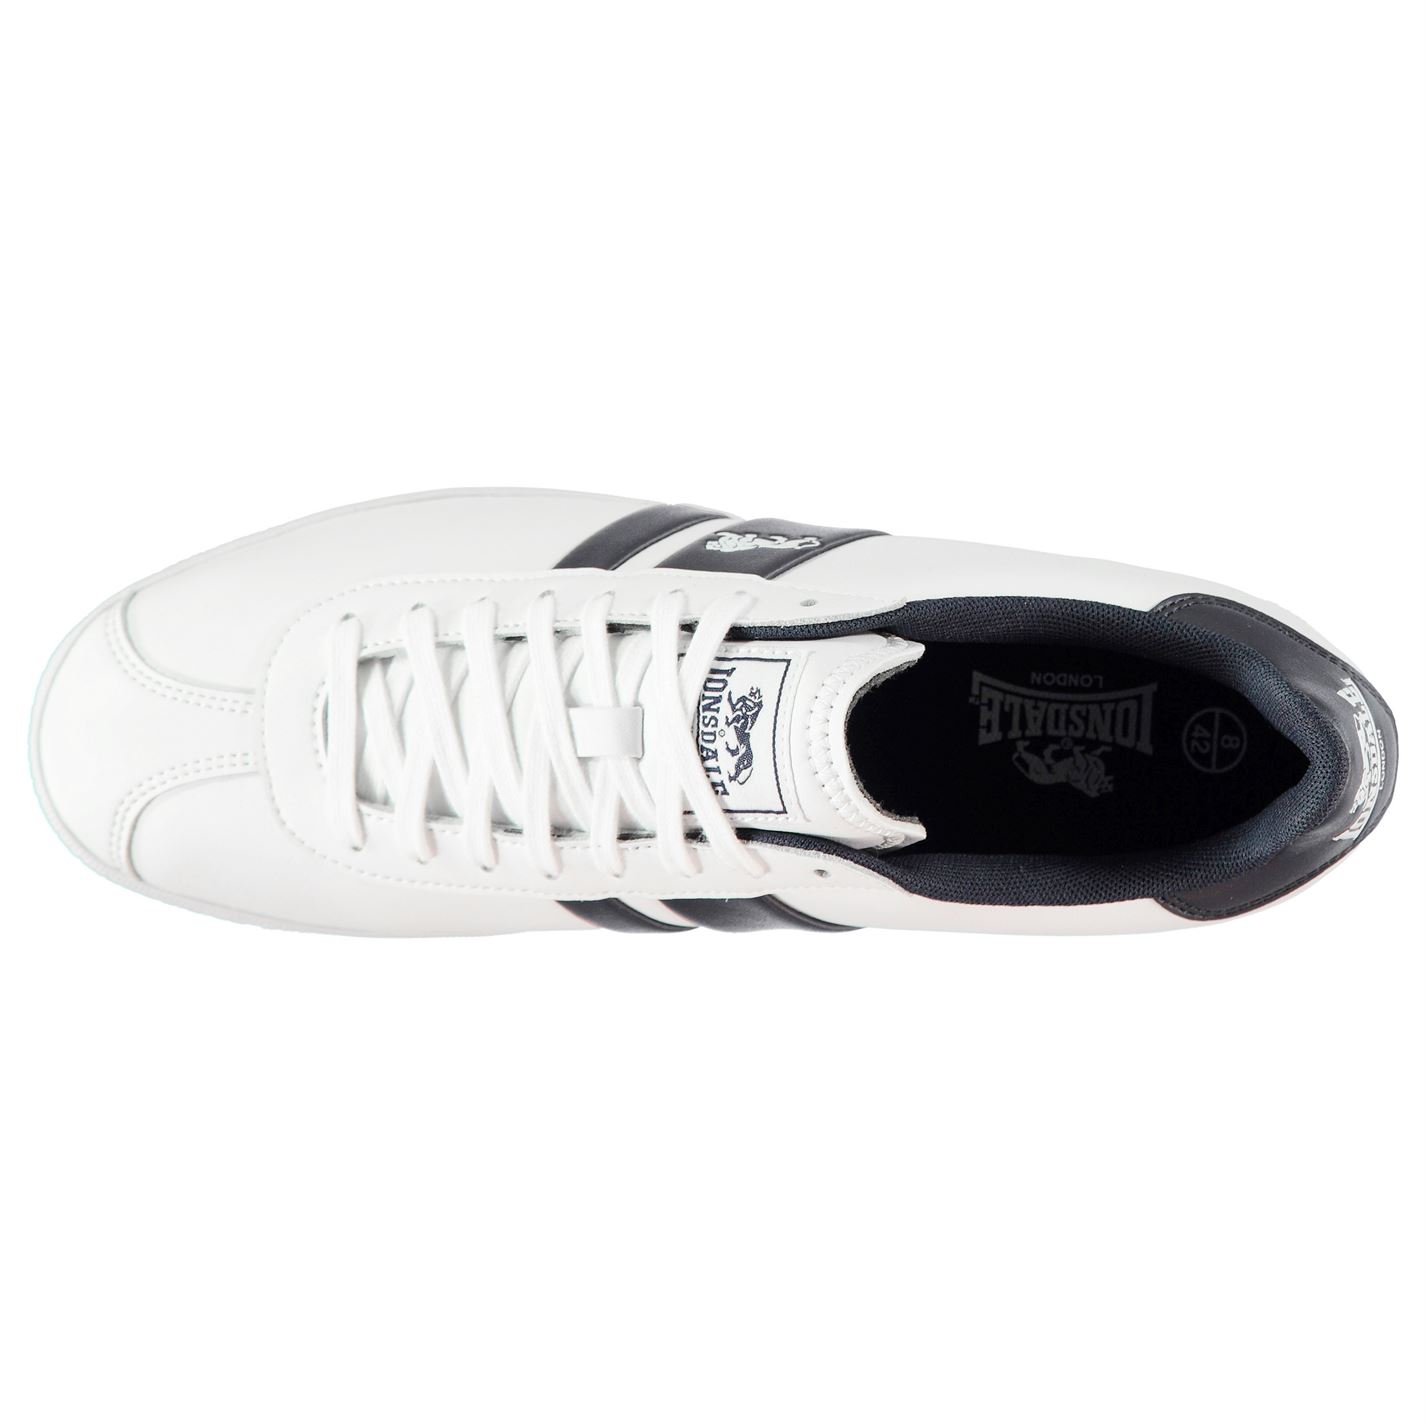 lonsdale tufnell mens trainers